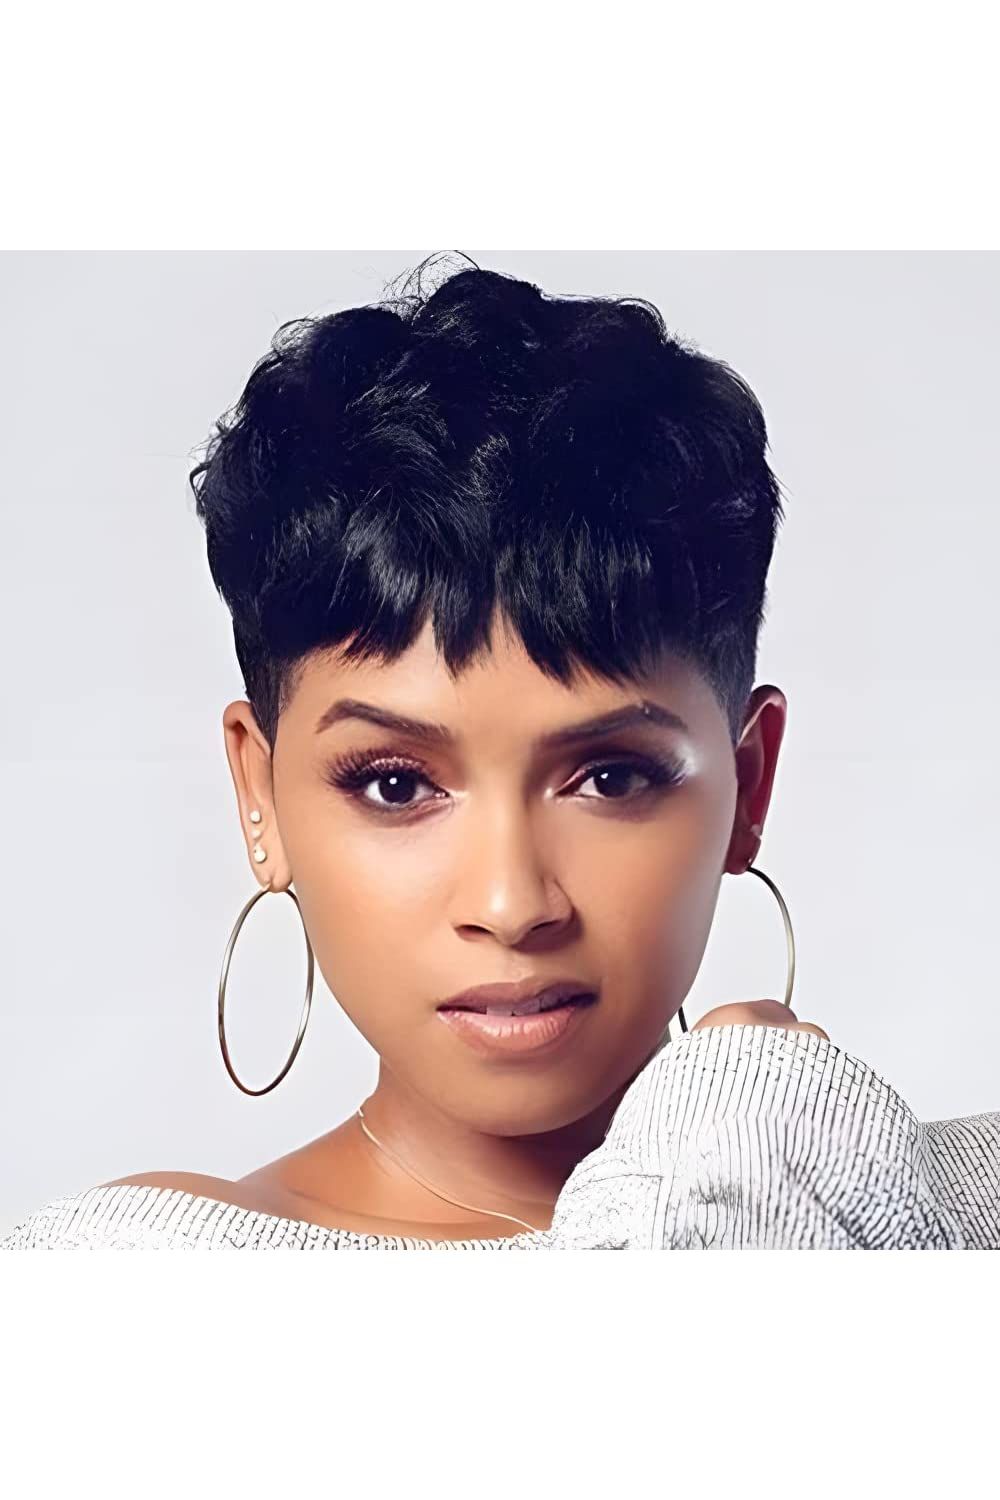 Stylish Short Haircuts for Black Women to Try Today